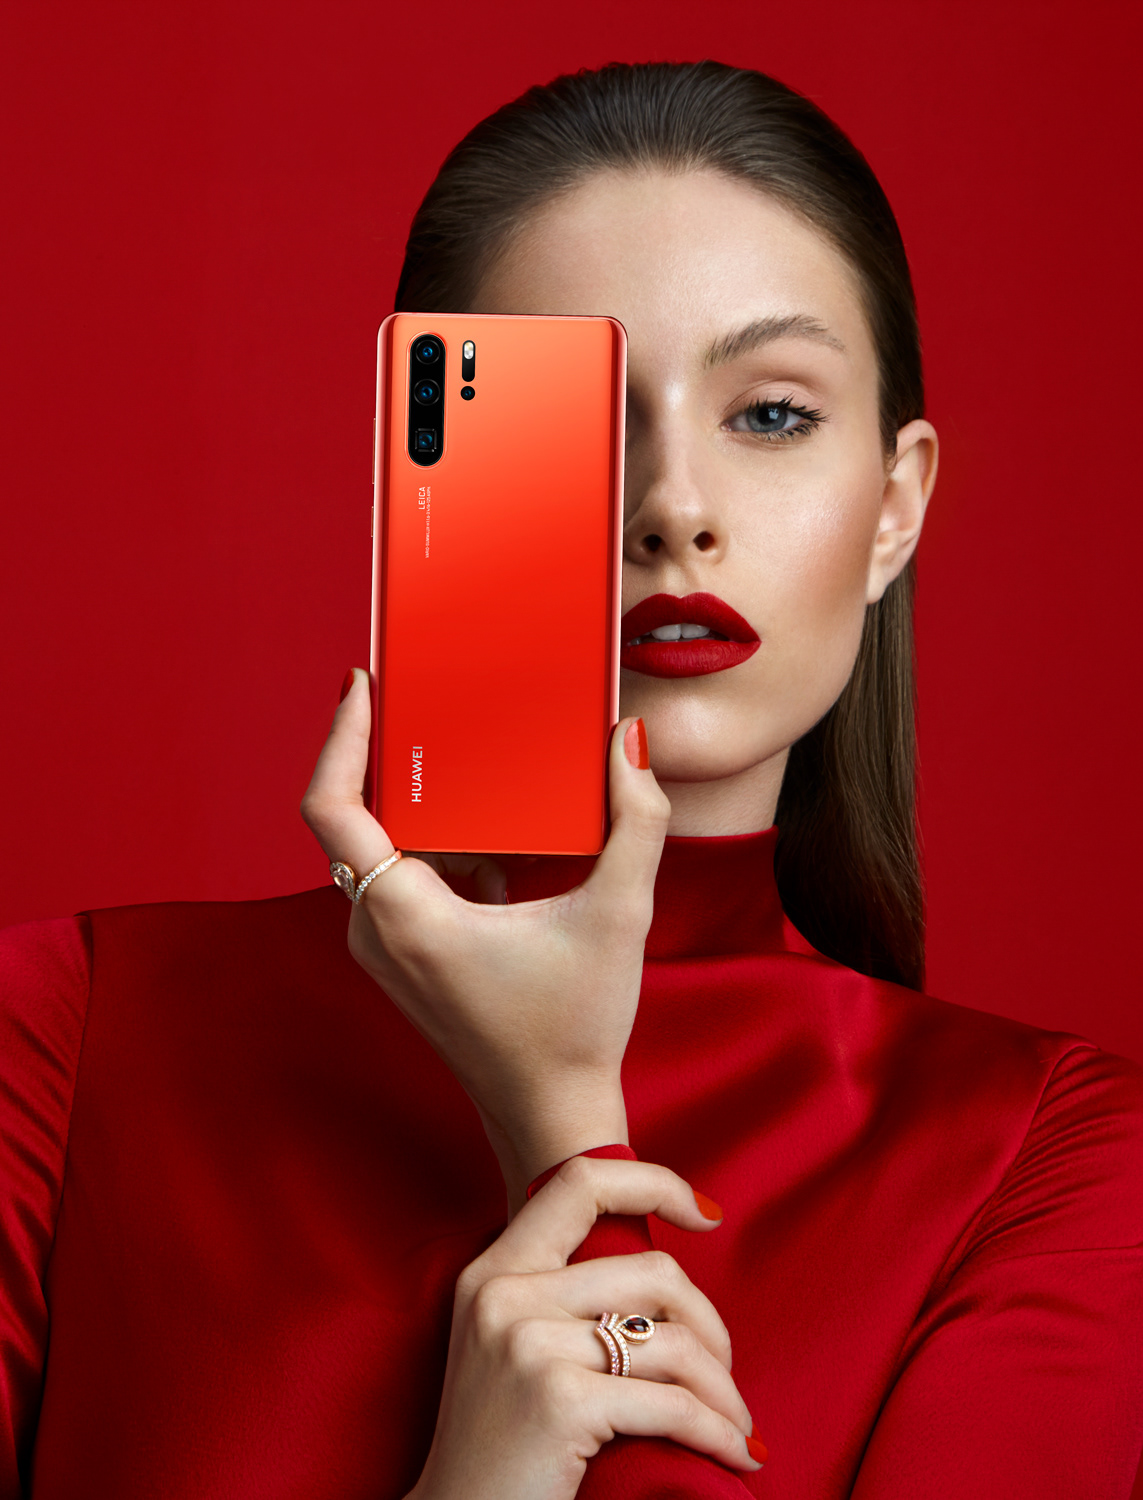 huawei advertisment high end retouch beauty retouch color skin phone editorial Leica